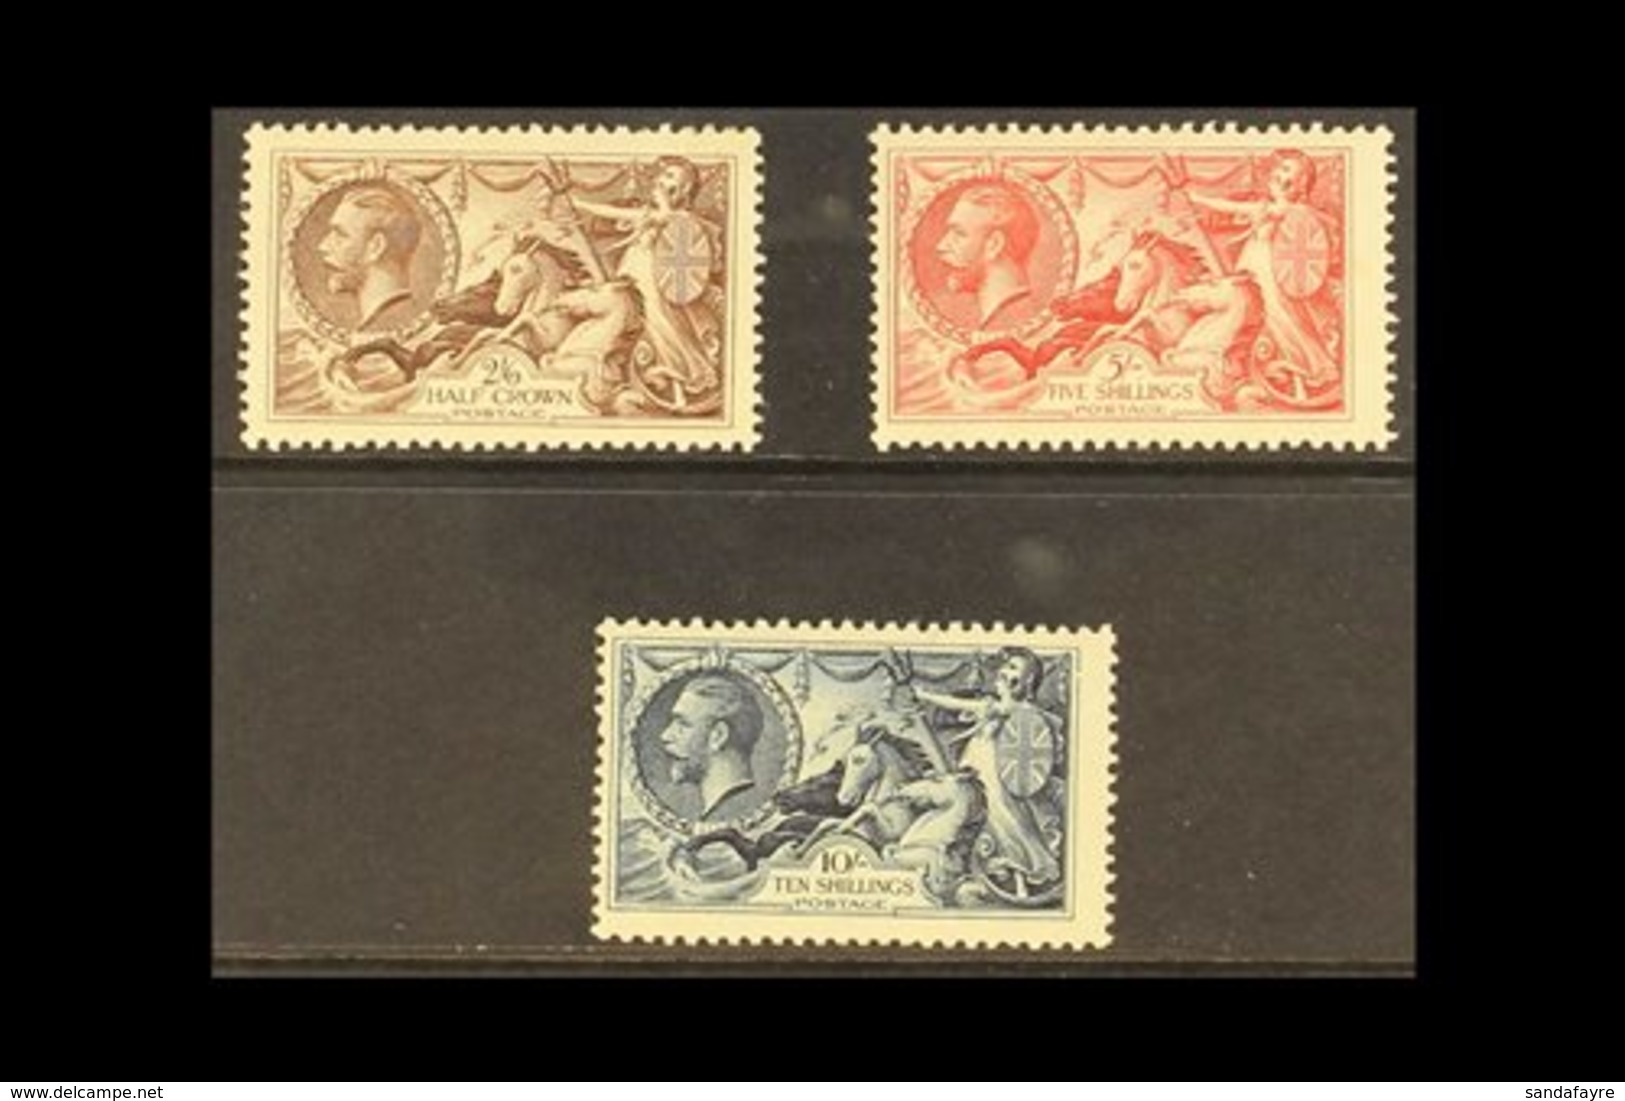 1934 Re-engraved Seahorses Set, SG 450/2, Fine Mint, Gum Very Lightly Toned, Cat.£575 (3 Stamps). For More Images, Pleas - Unclassified